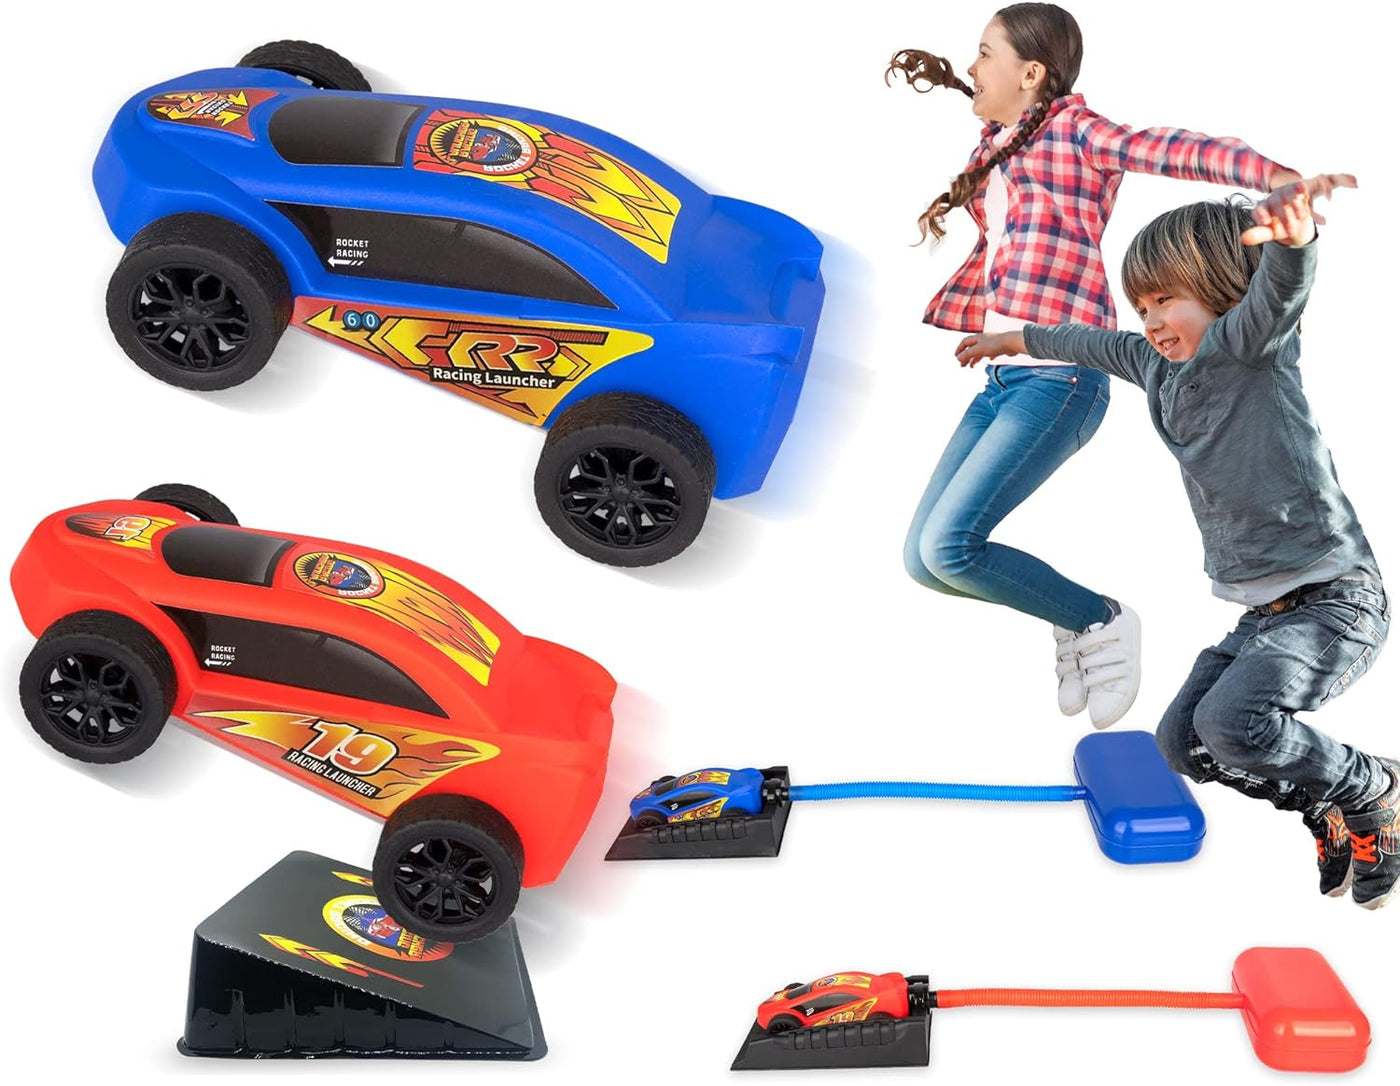 Car Rocket Launcher For Kids Super Catapult Car Racers, Includes 2 Cars, 2 Stomp Launchers, Ramp, finish line, & Decorating Decals, Car Toys for Boys & Girls, Adrenaline-Pumping Outdoor Toys for Kids